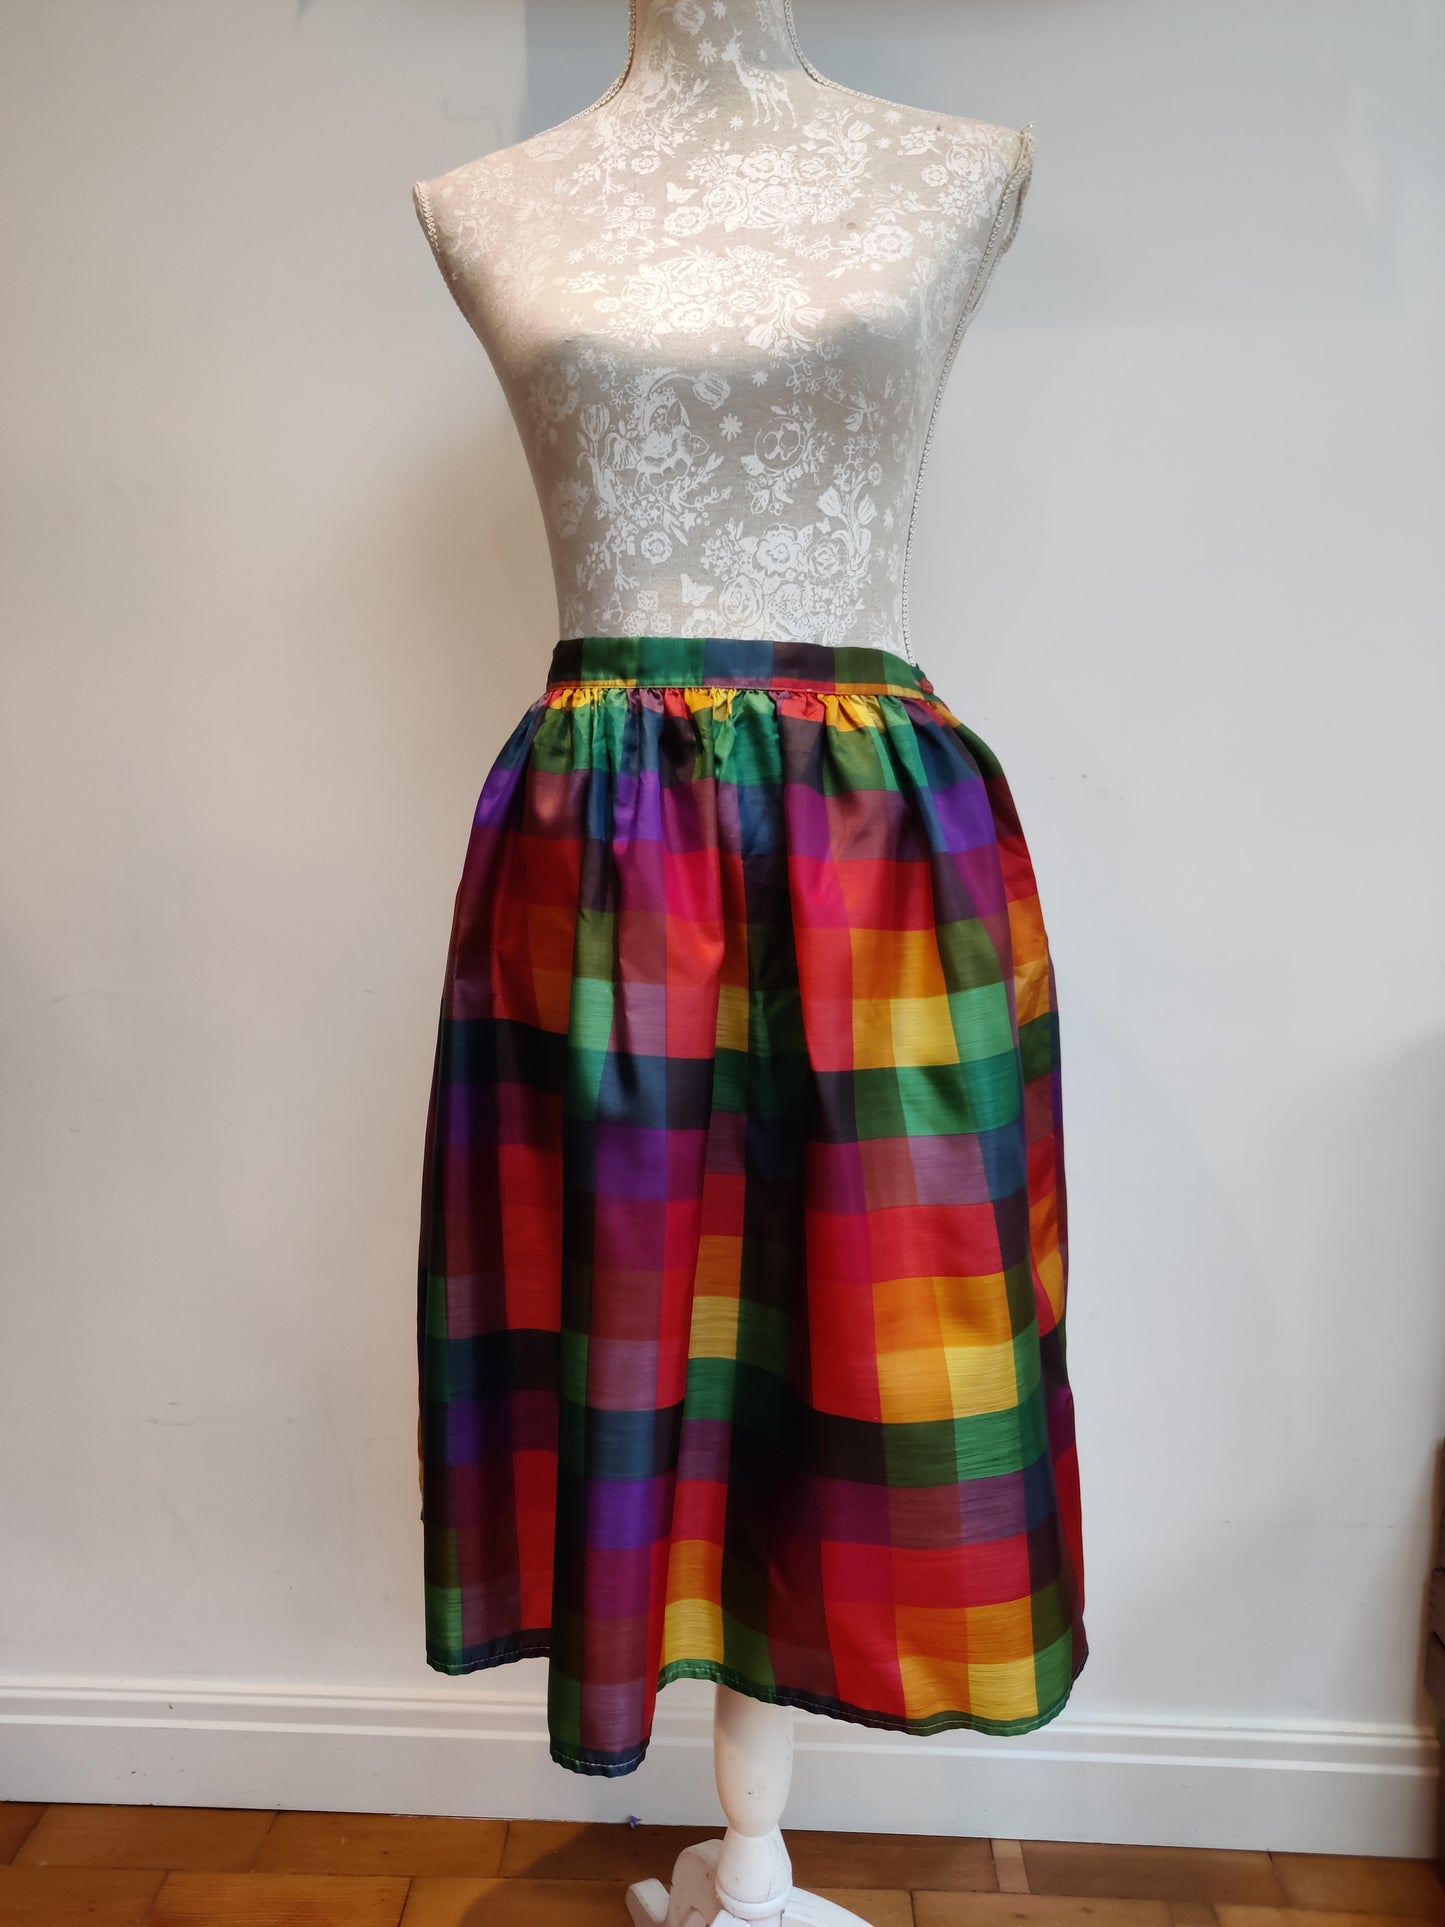 Vintage skirt and top set in colourful check print.